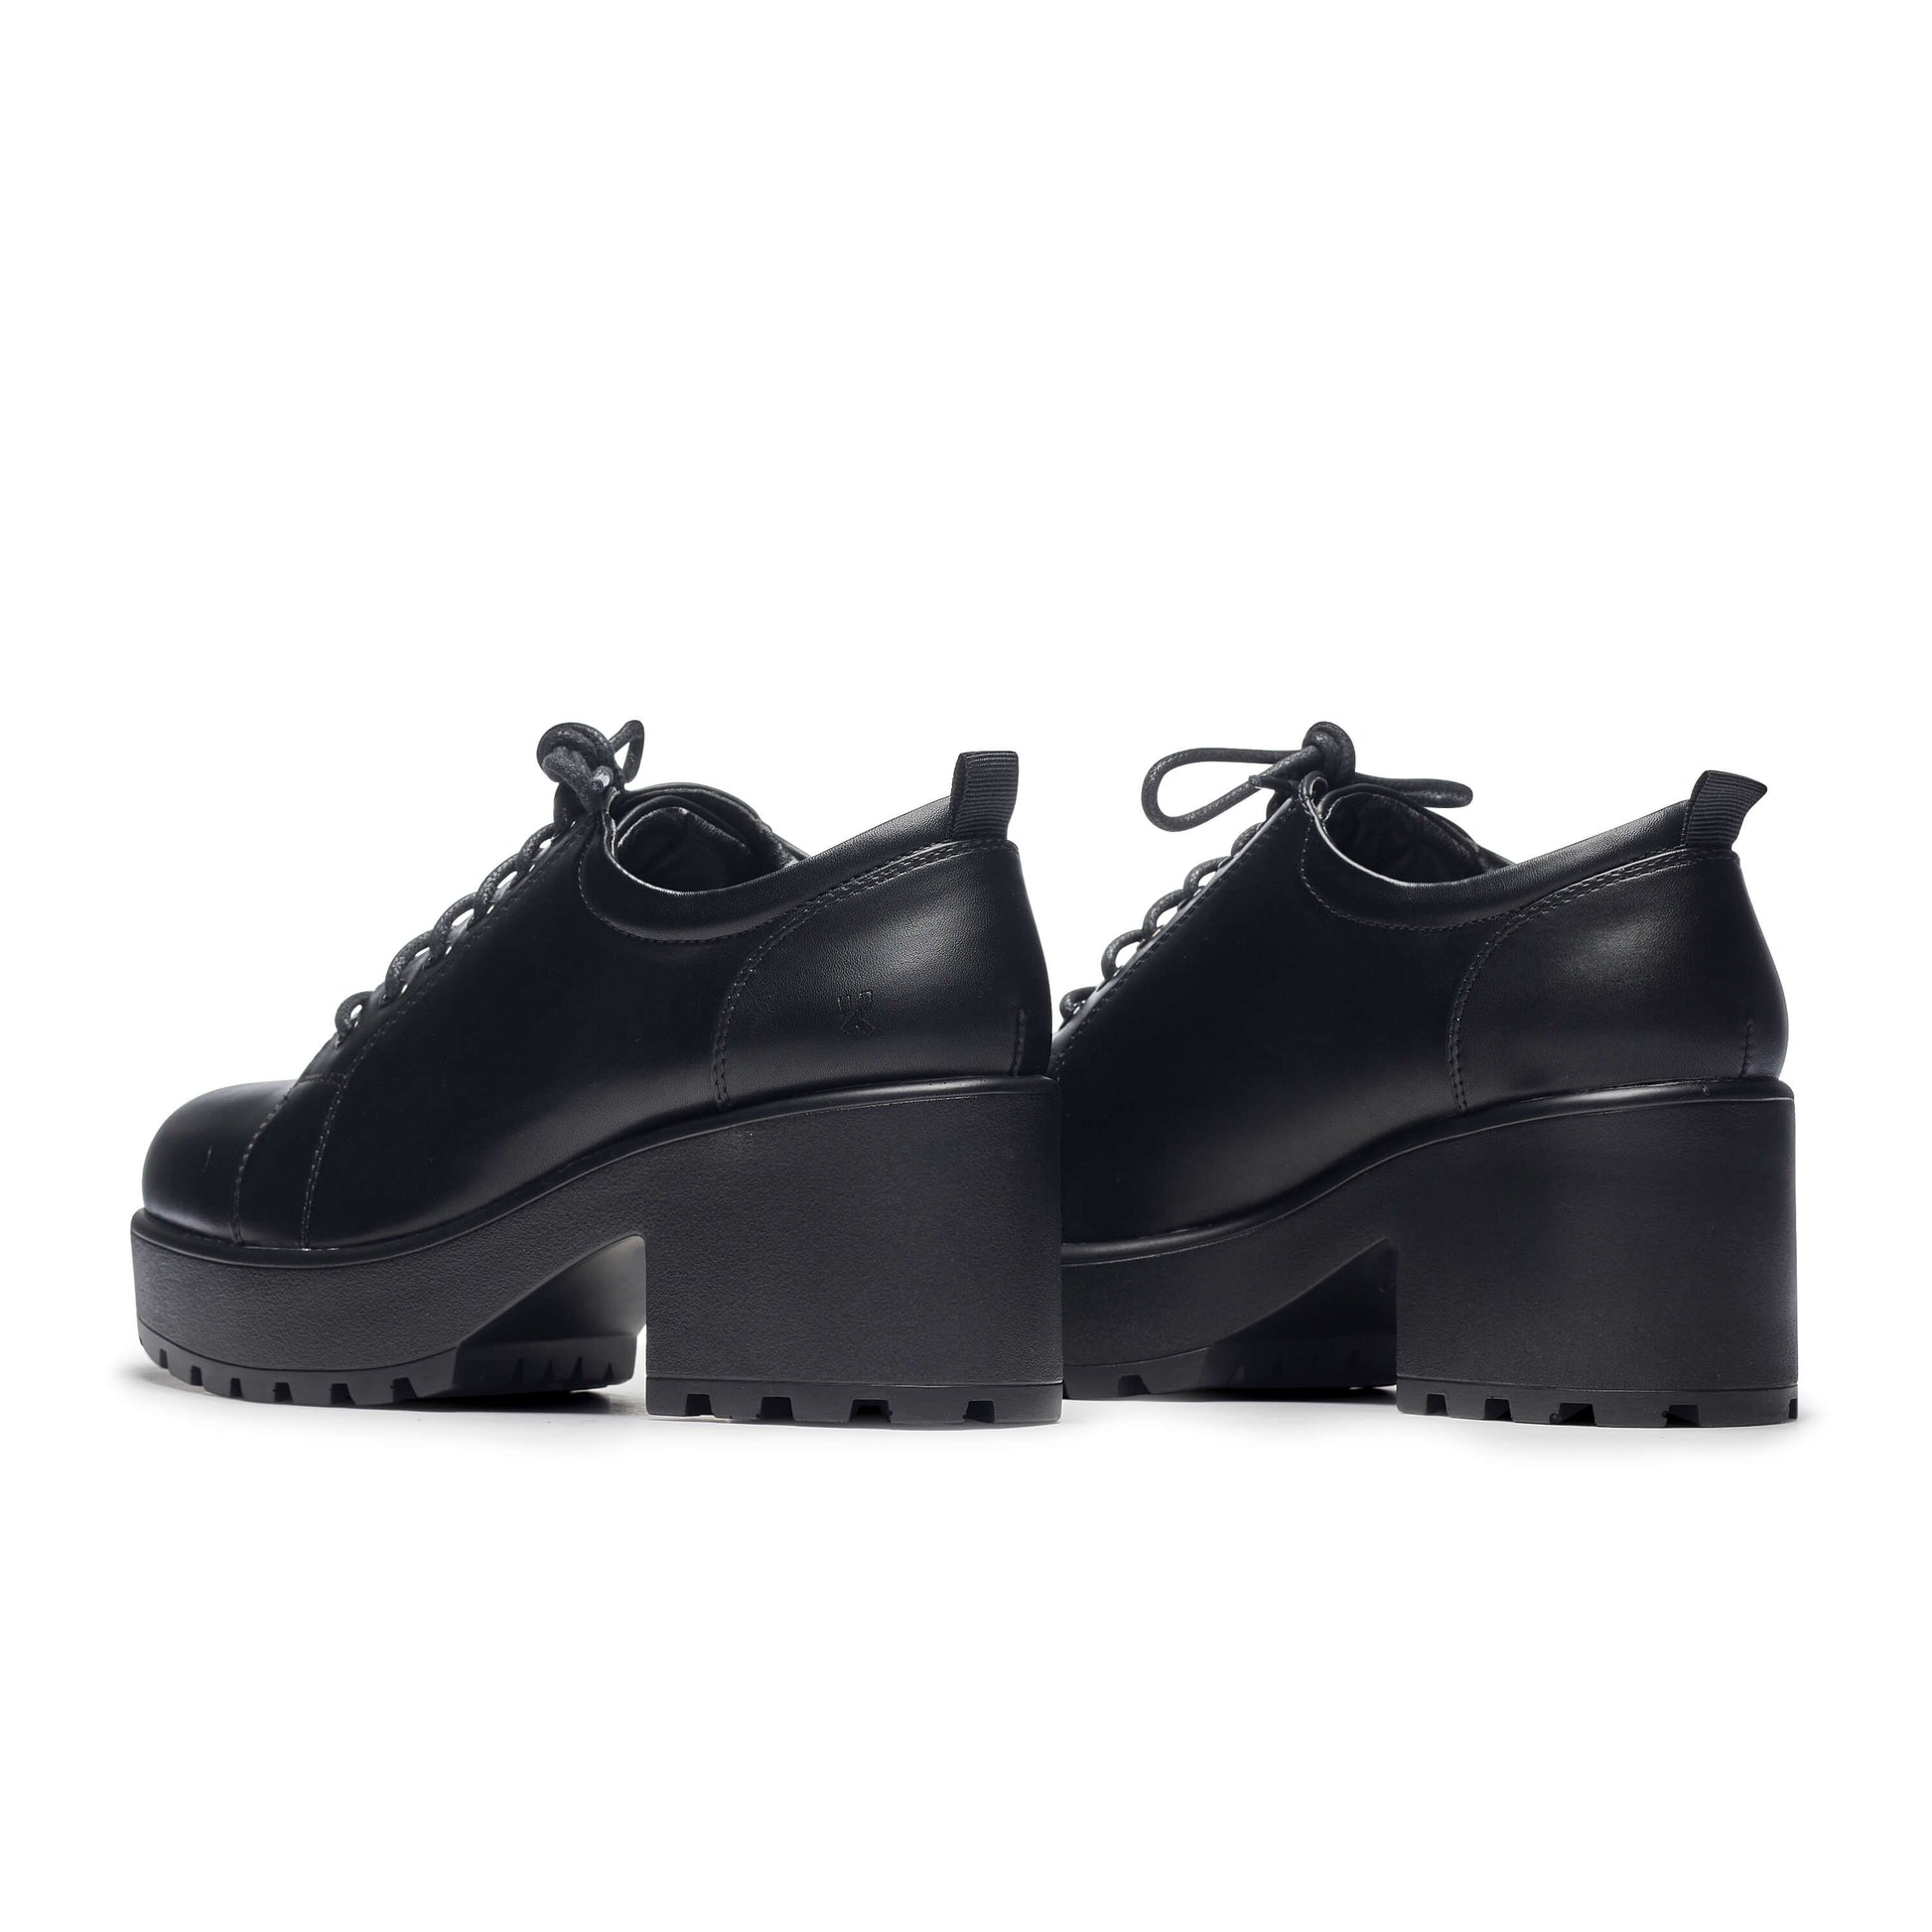 Rei Reloaded Chunky Shoes - Shoes - KOI Footwear - Black - Back View